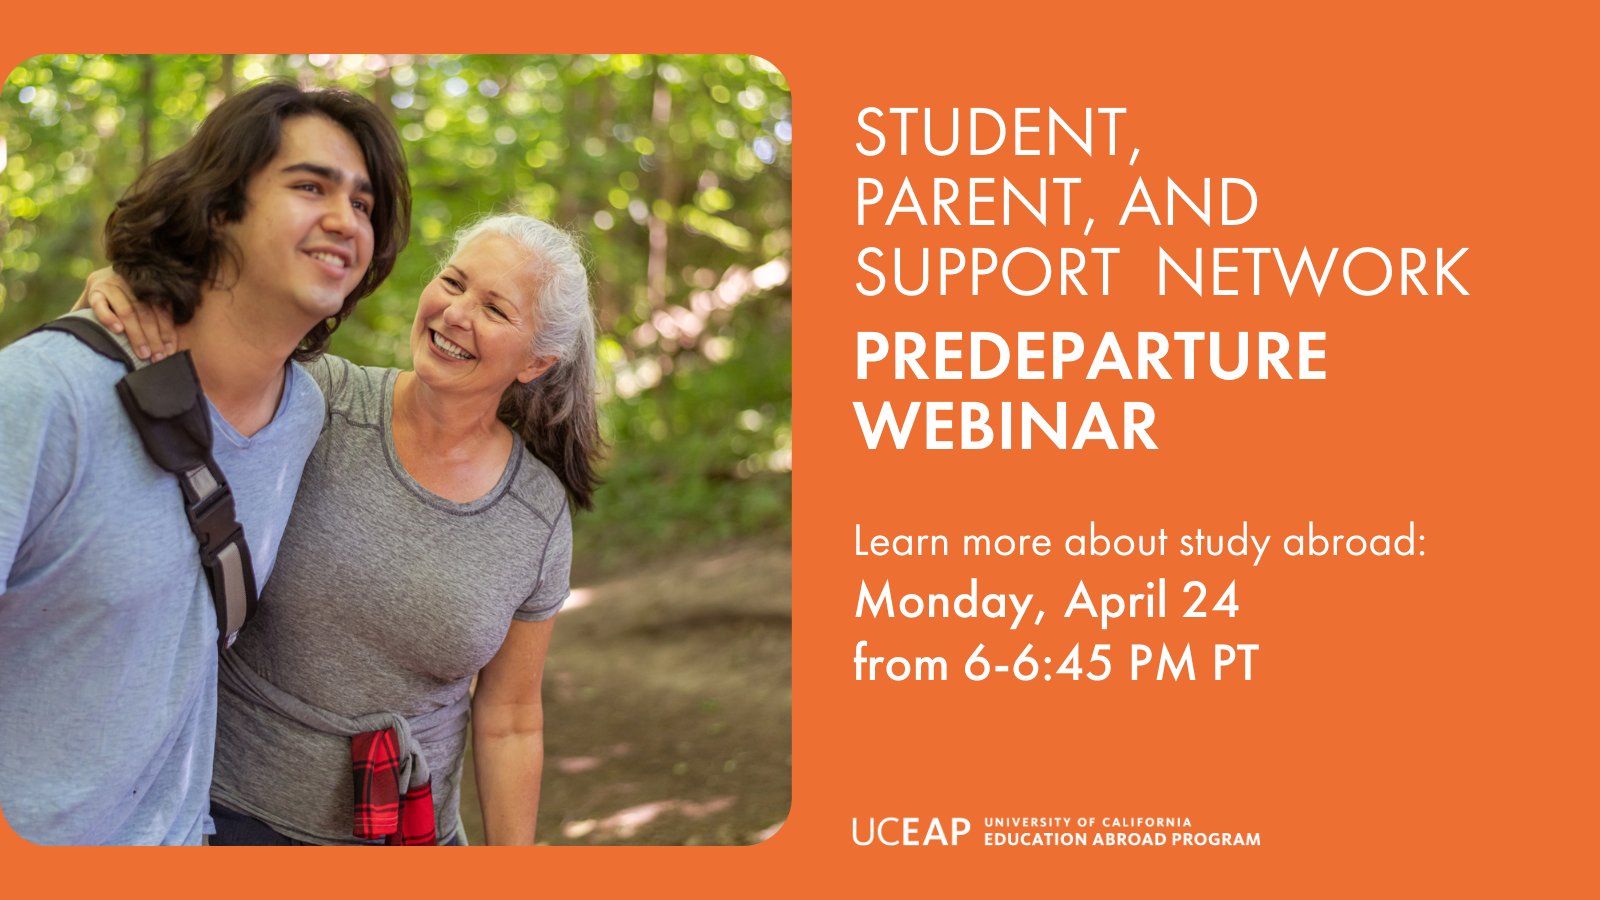 Student, Parent, and Support Network Predeparture Webinar flyer and login info